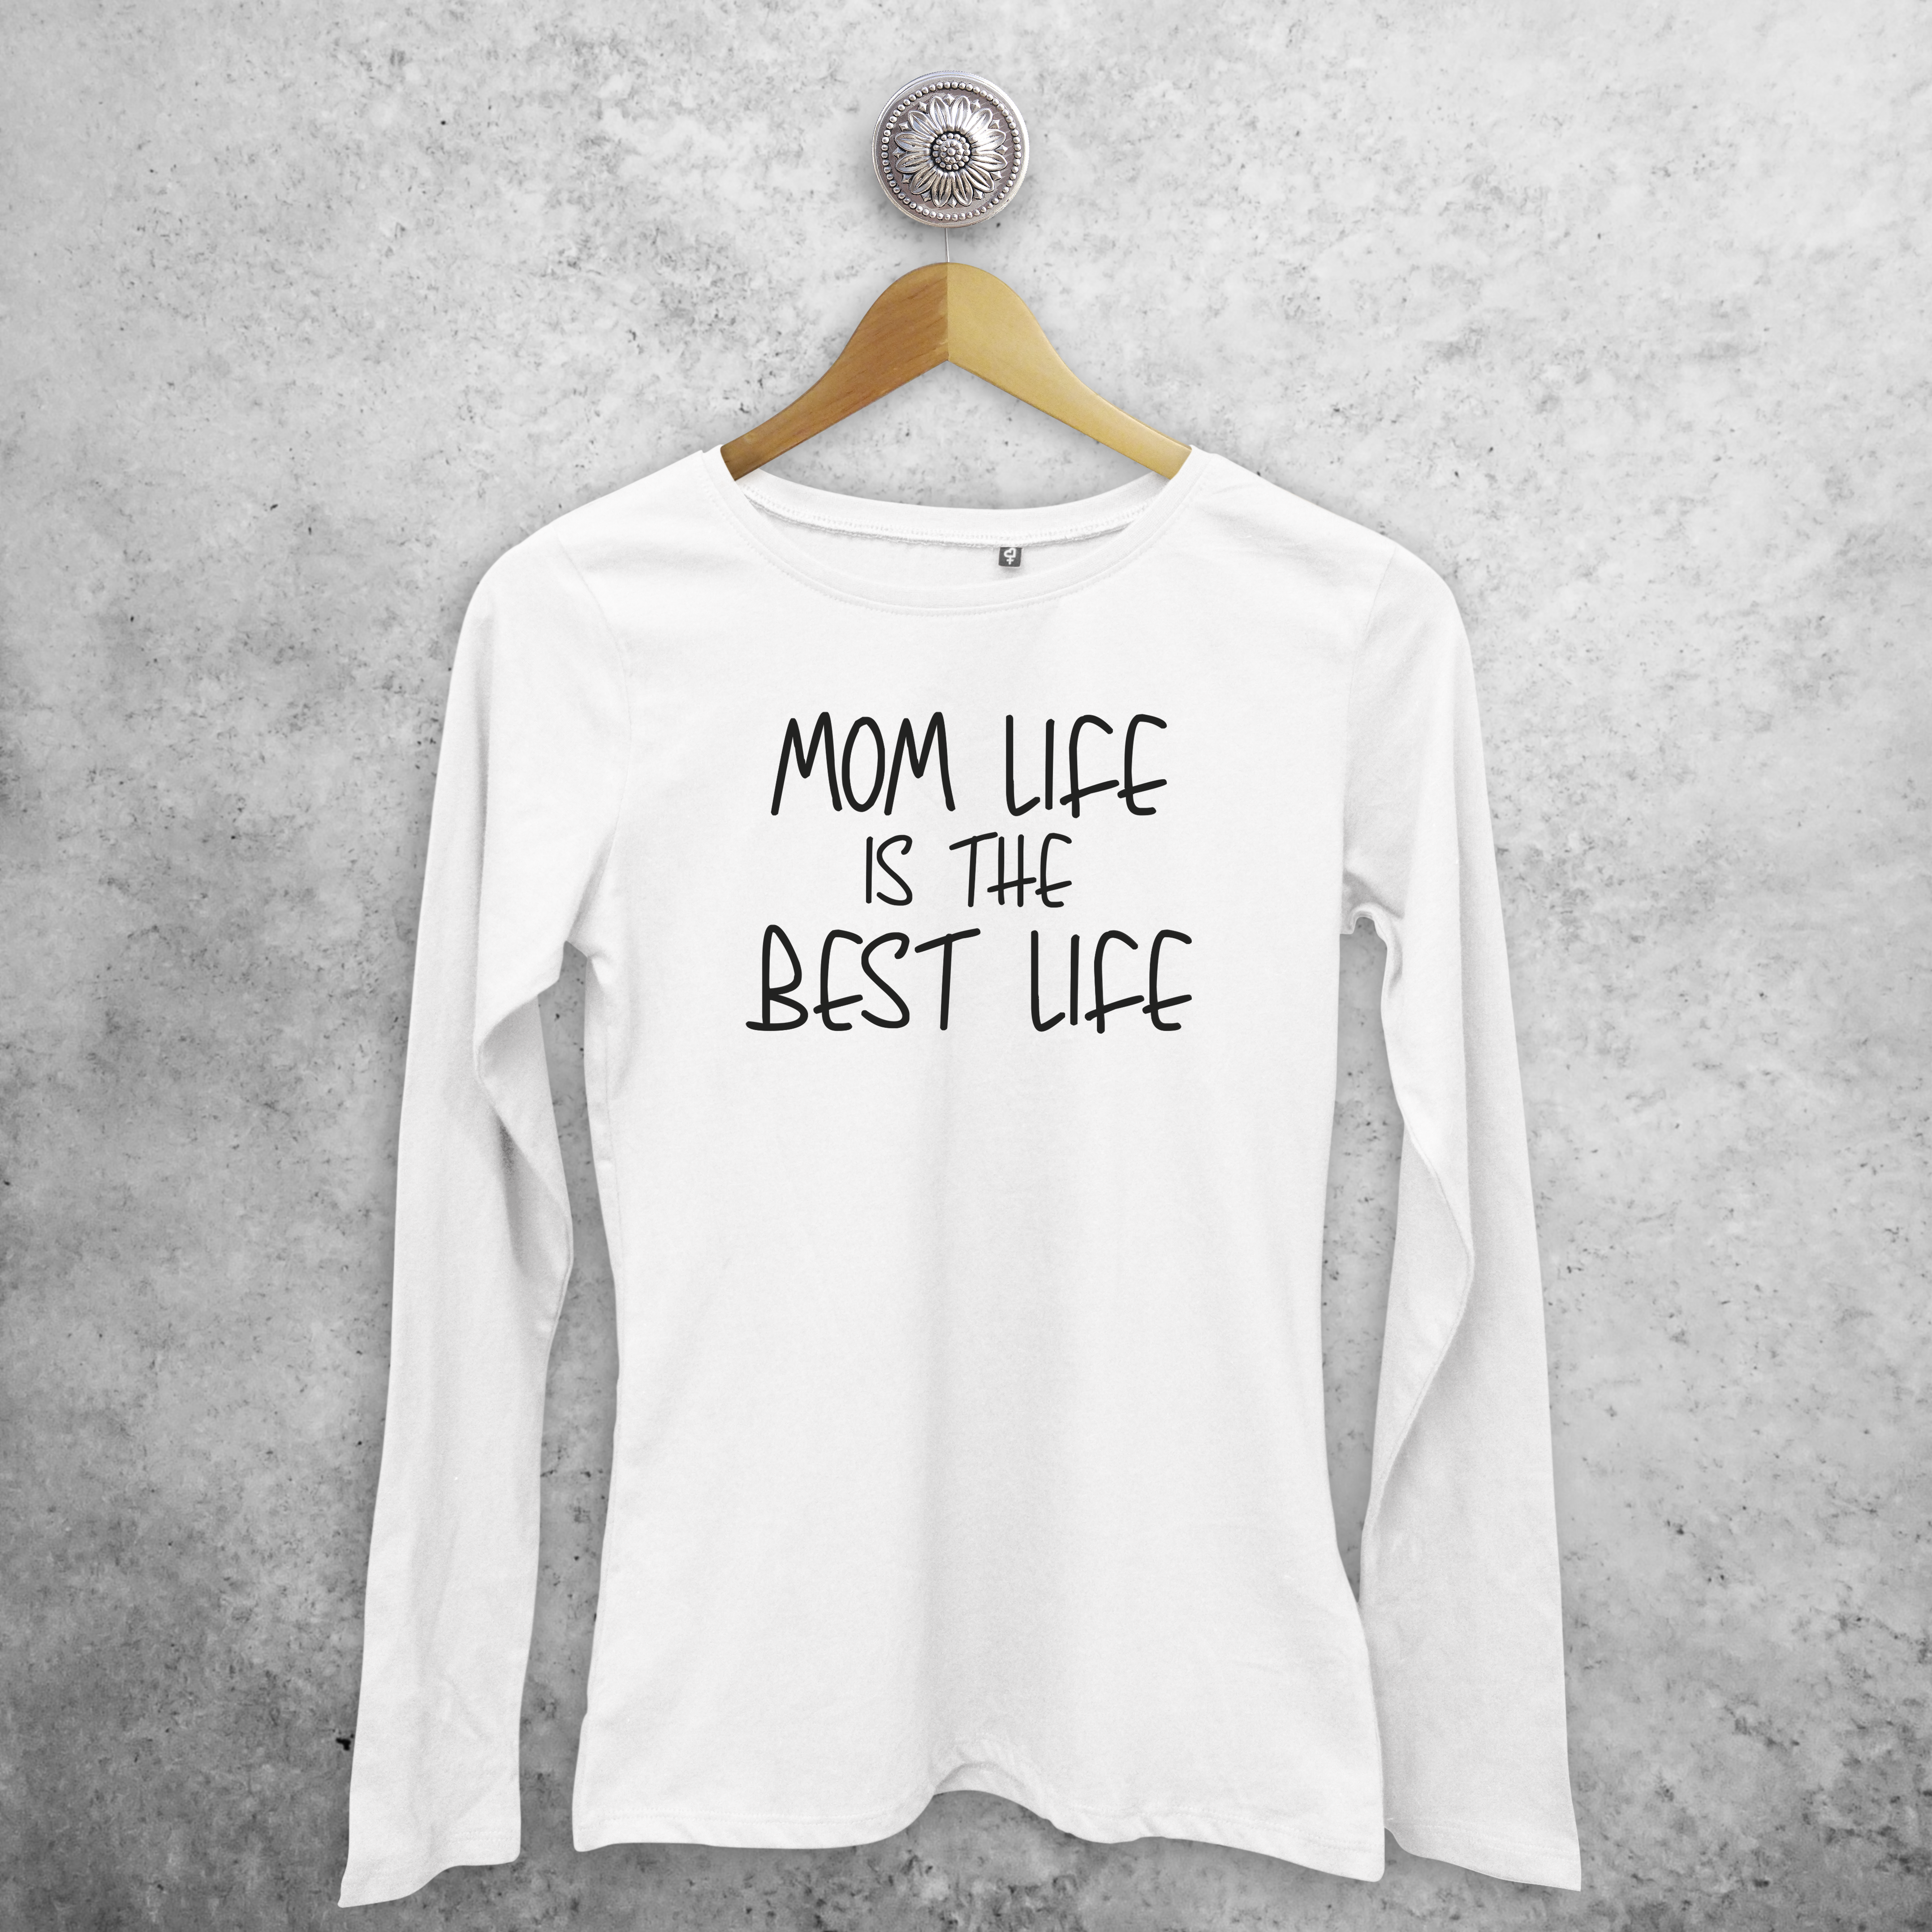 'Mom life is the best life' adult longsleeve shirt